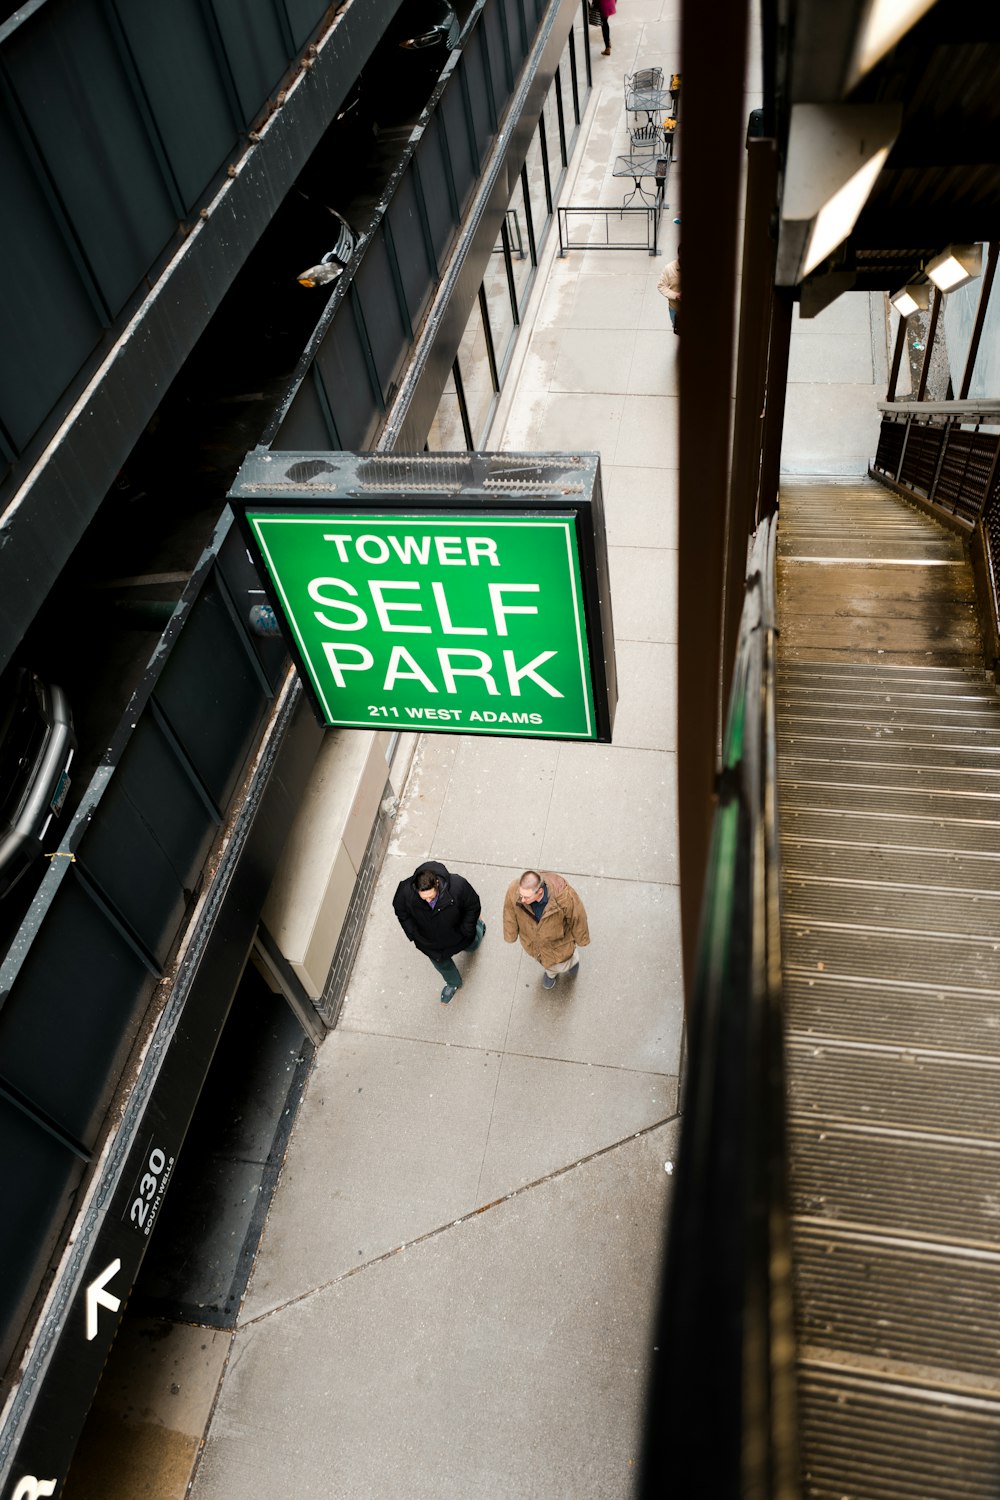 two person's walking underneath Tower Self Park signage